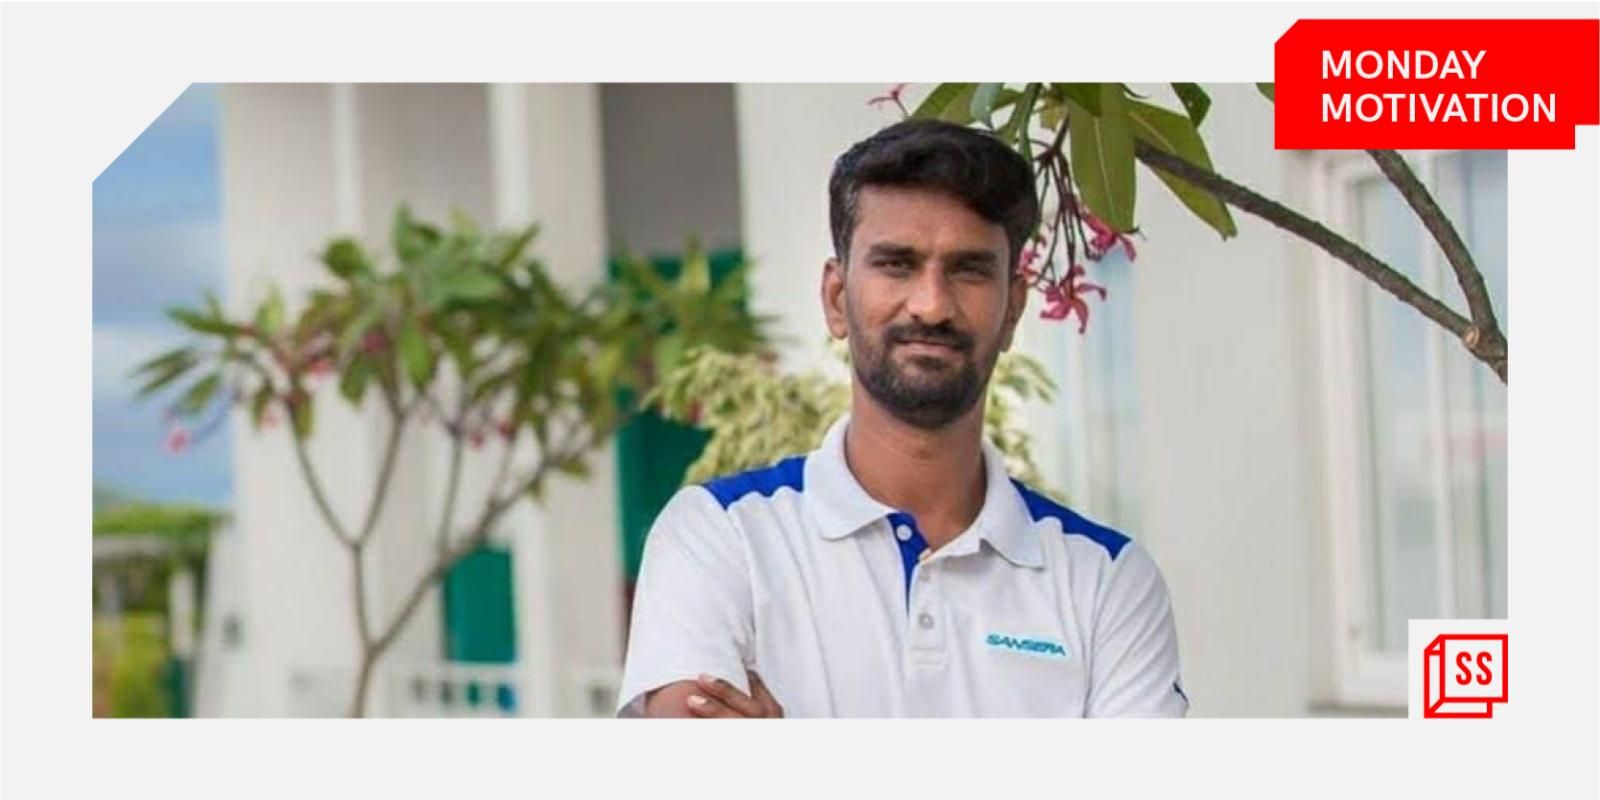 [Monday Motivation] Meet the man who left a lucrative job to rejuvenate lakes in Bengaluru